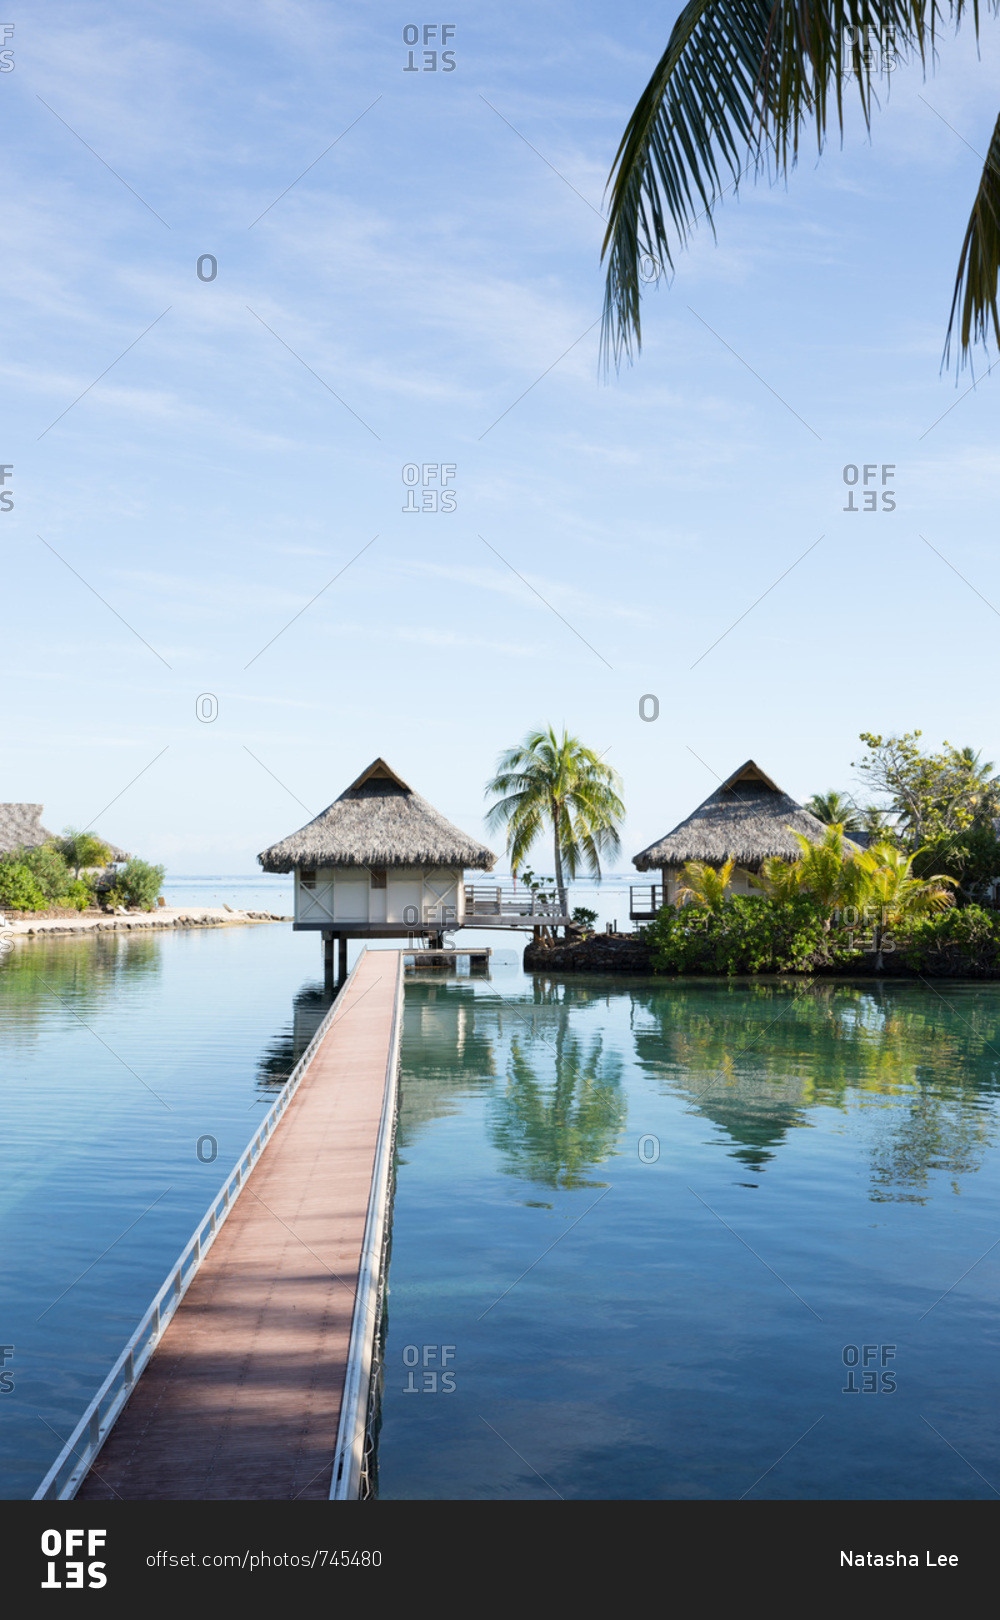 Overwater bungalows at end of long walkway over blue waters of lagoon on tropical island